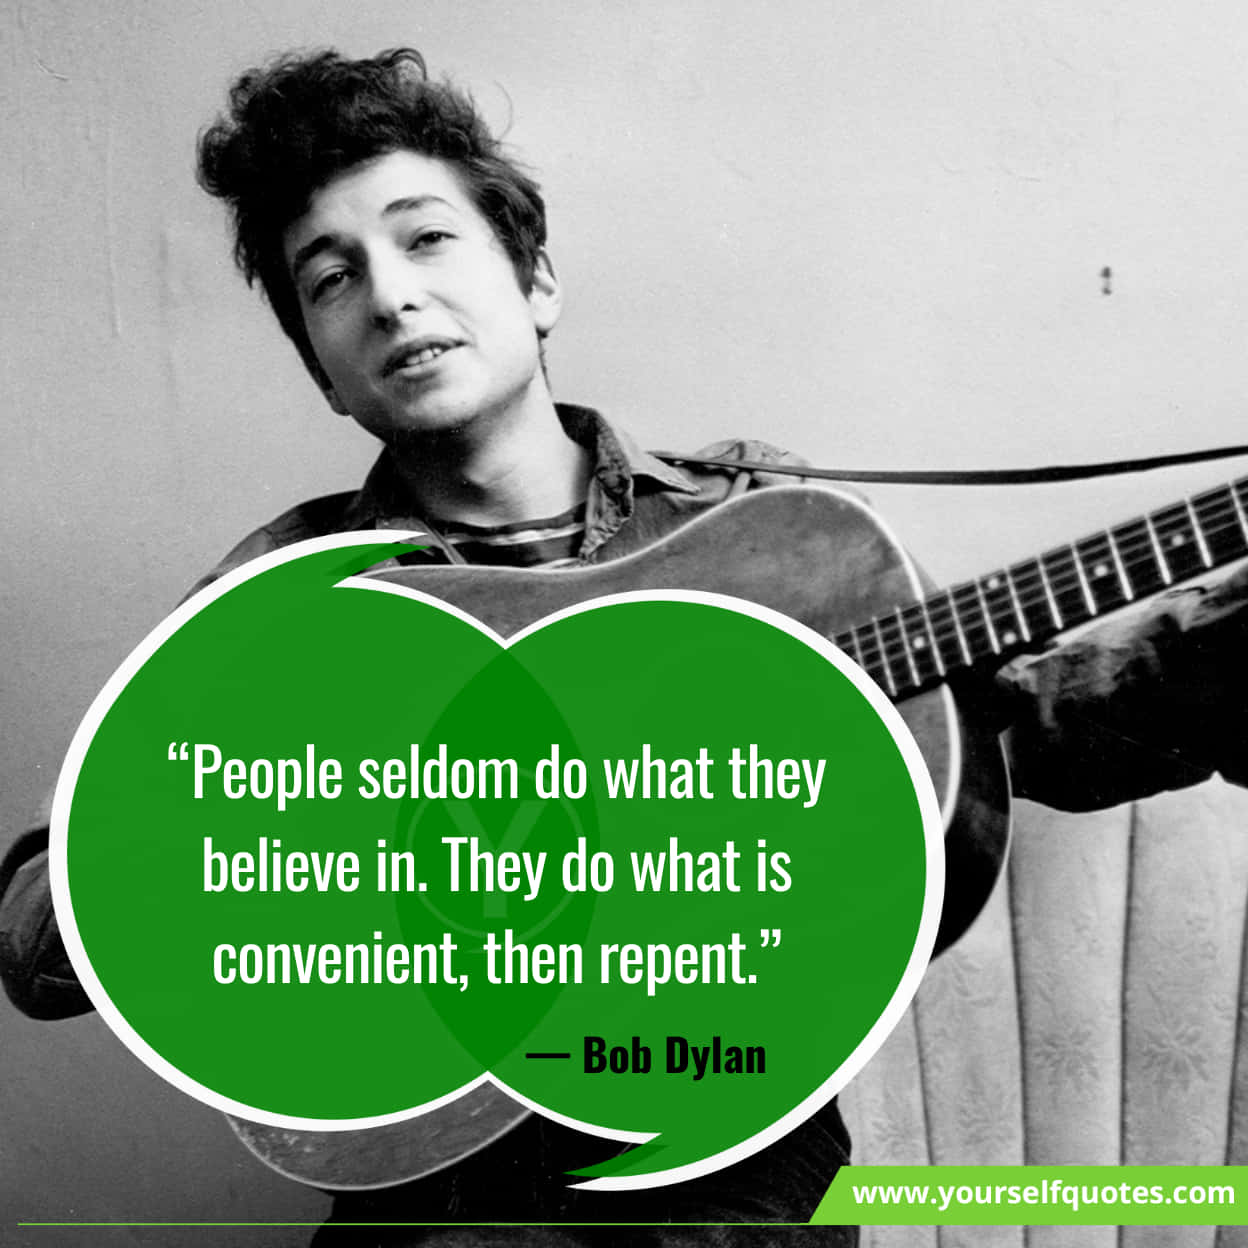 Bob Dylan Quotes On Best Life